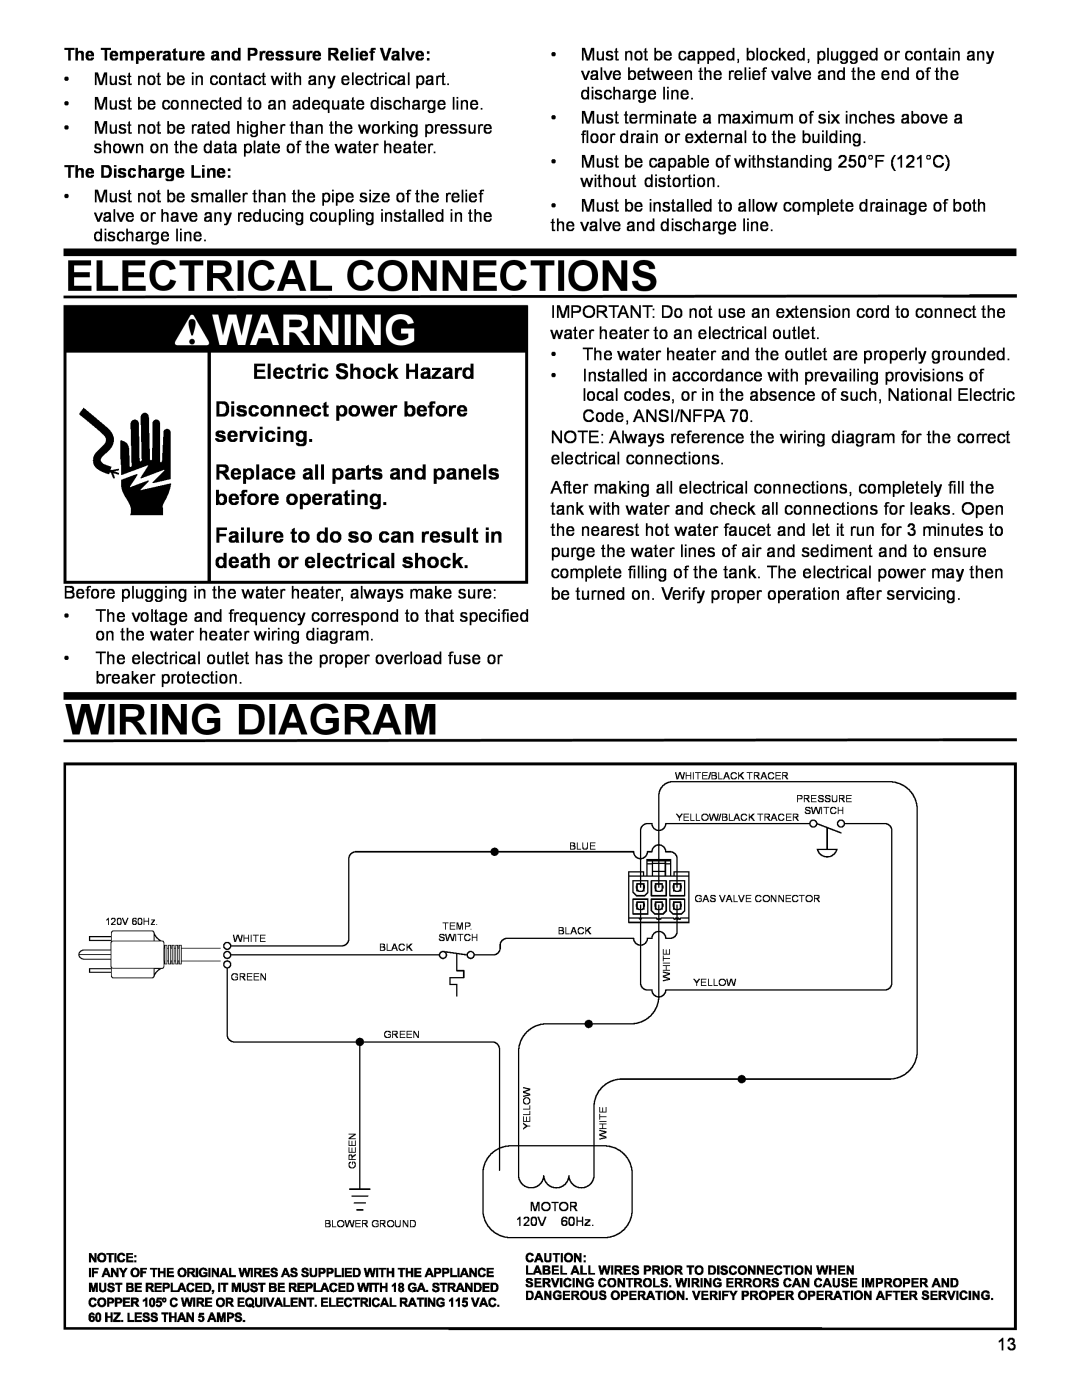 American Water Heater 50-60K BTU Electrical Connections, Wiring Diagram, Electric Shock Hazard, Disconnect power before 